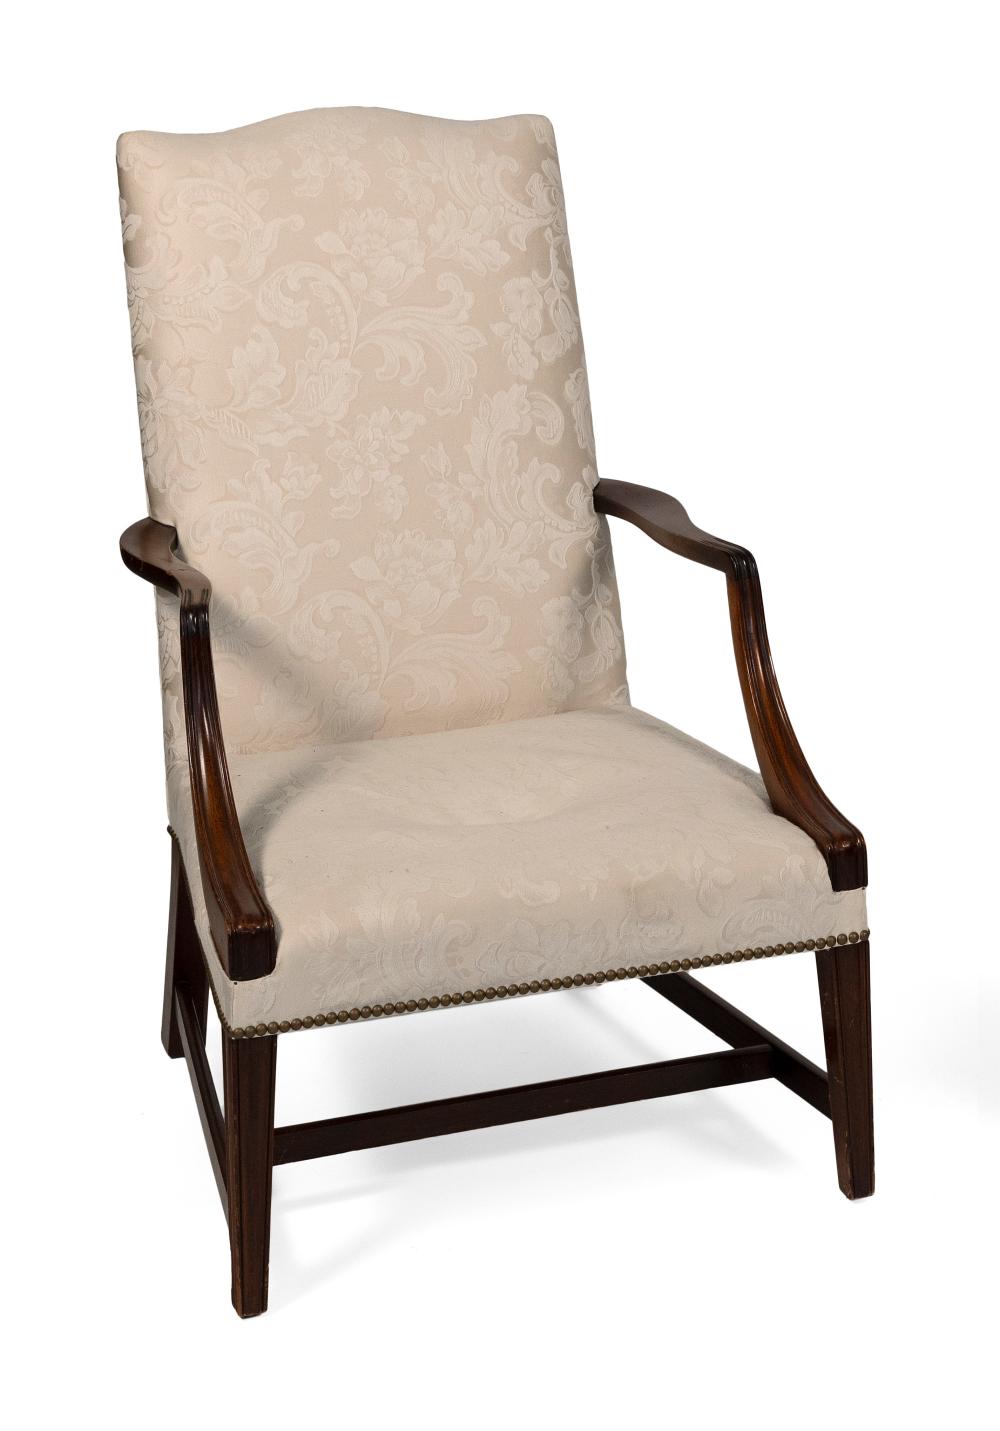 FEDERAL STYLE LOLLING CHAIR CIRCA 34d4ff